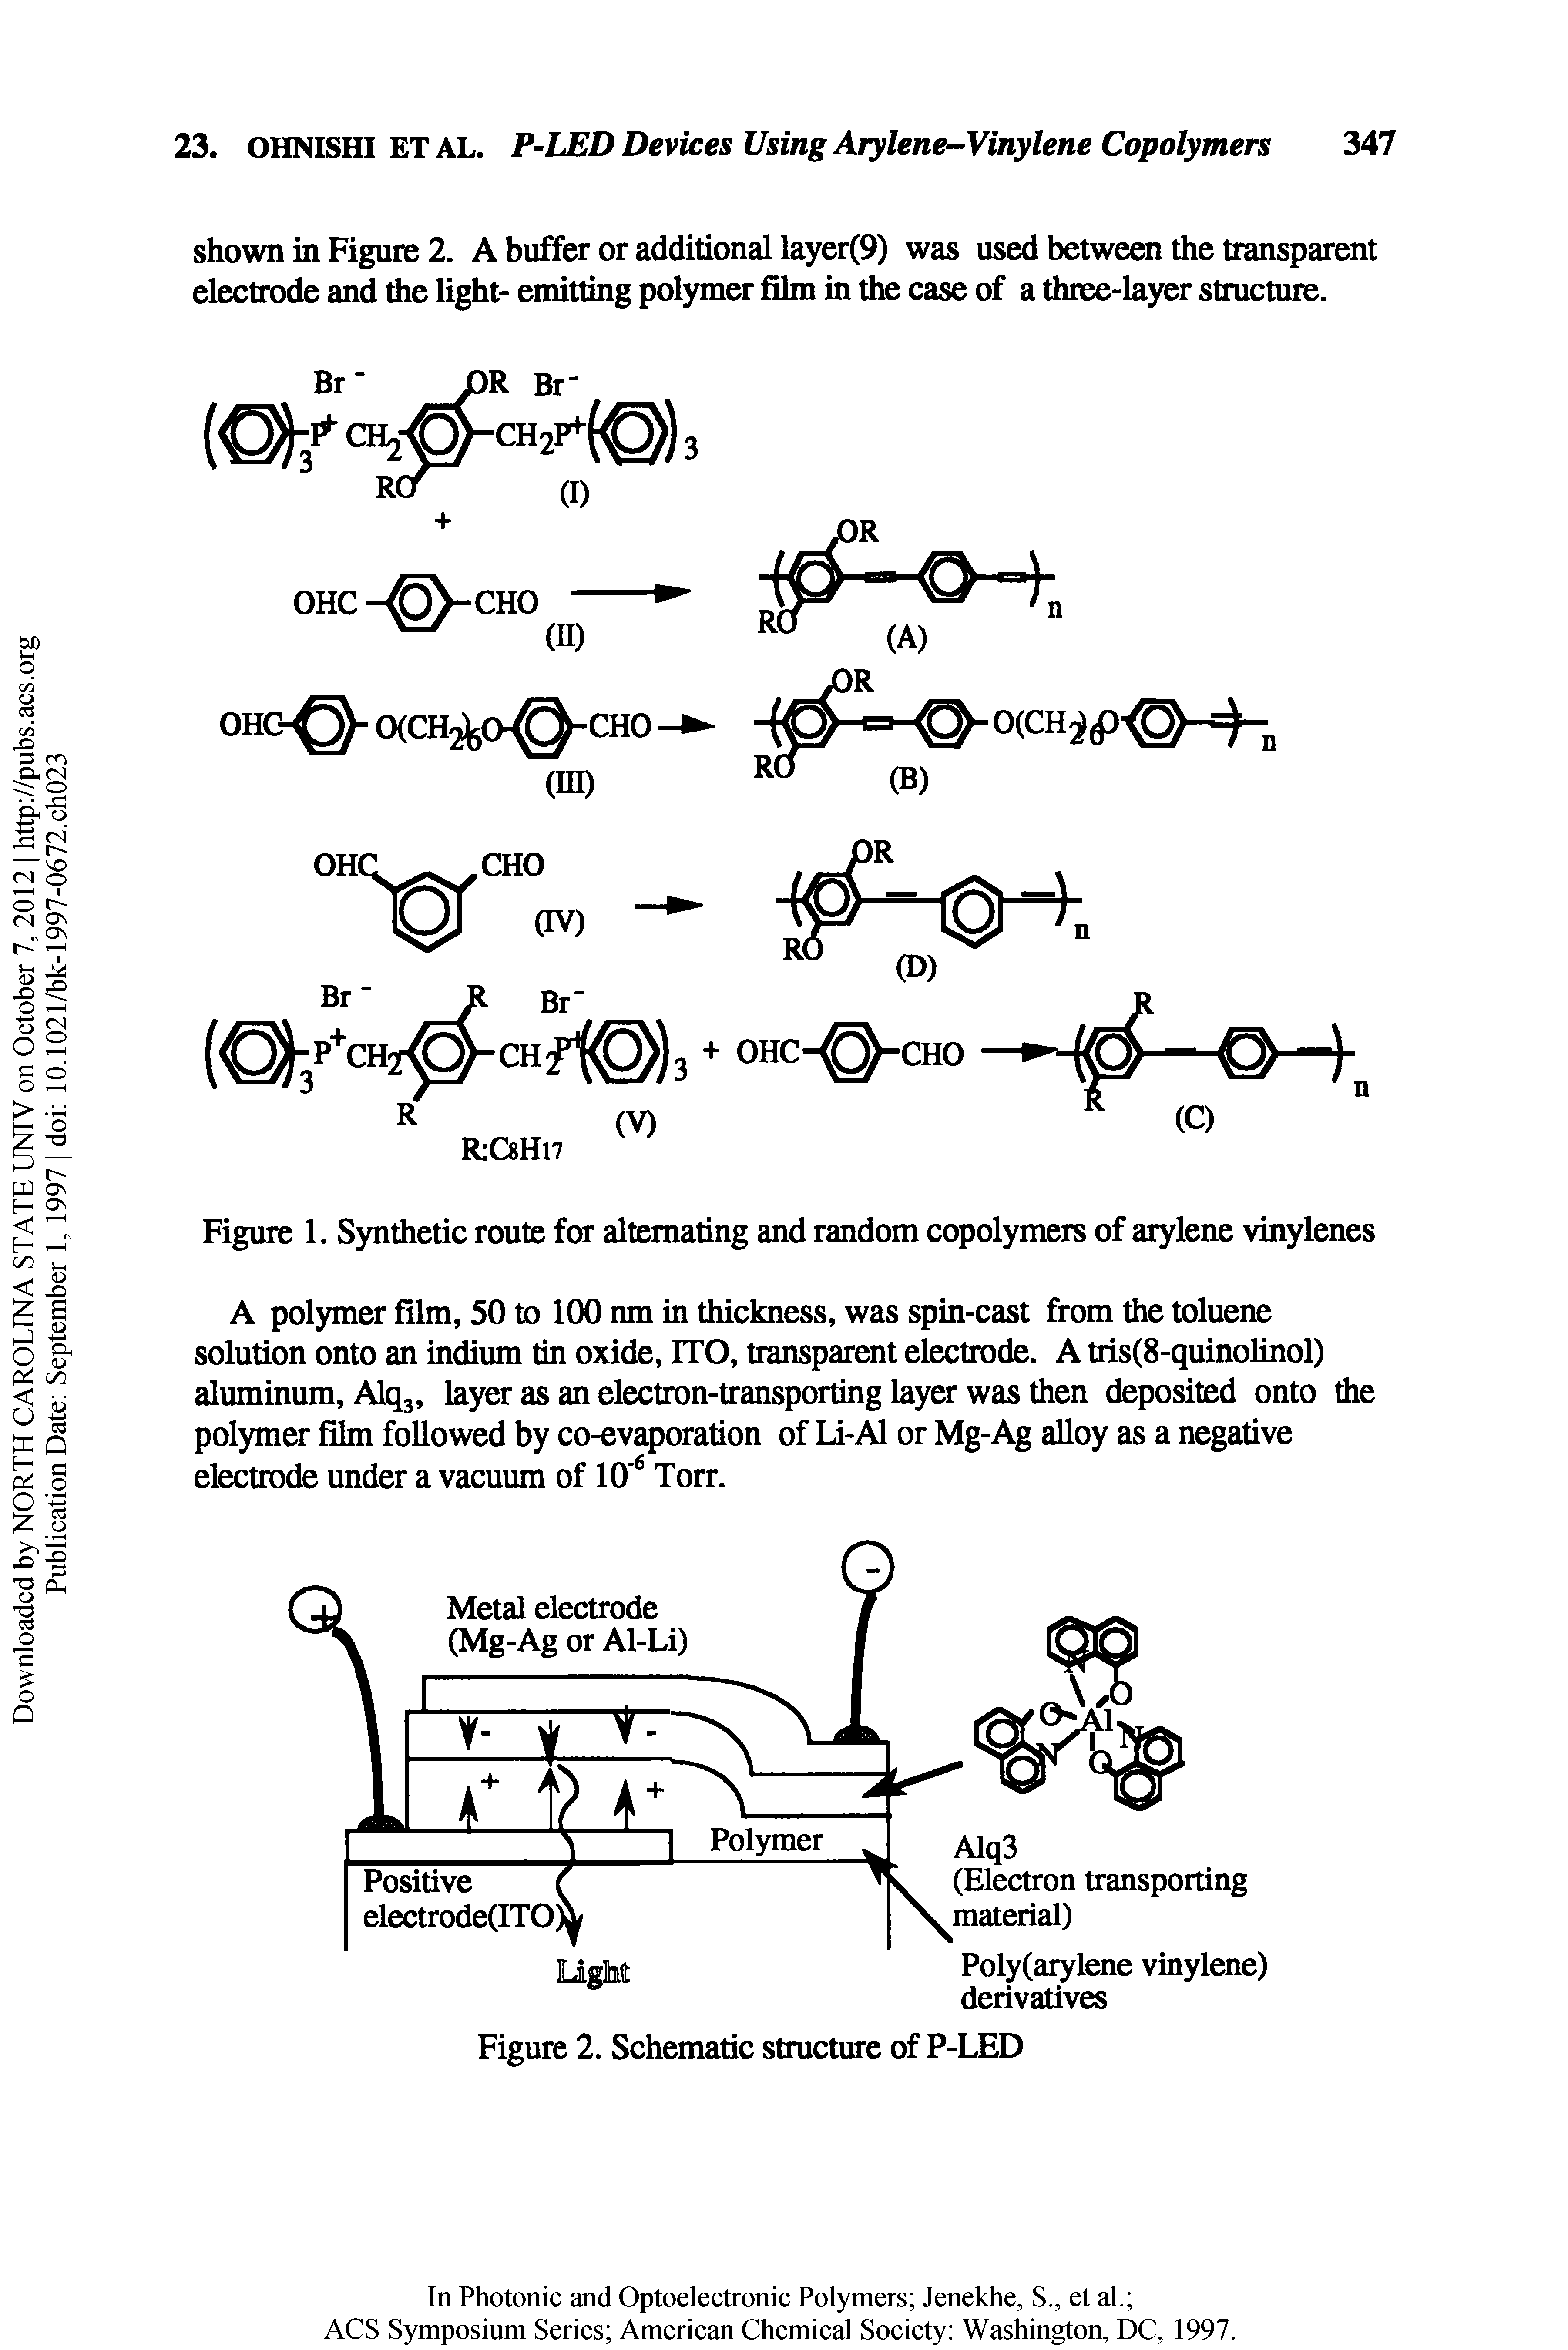 Figure 1. Synthetic route for alternating and random copolymers of arylene vinylenes...